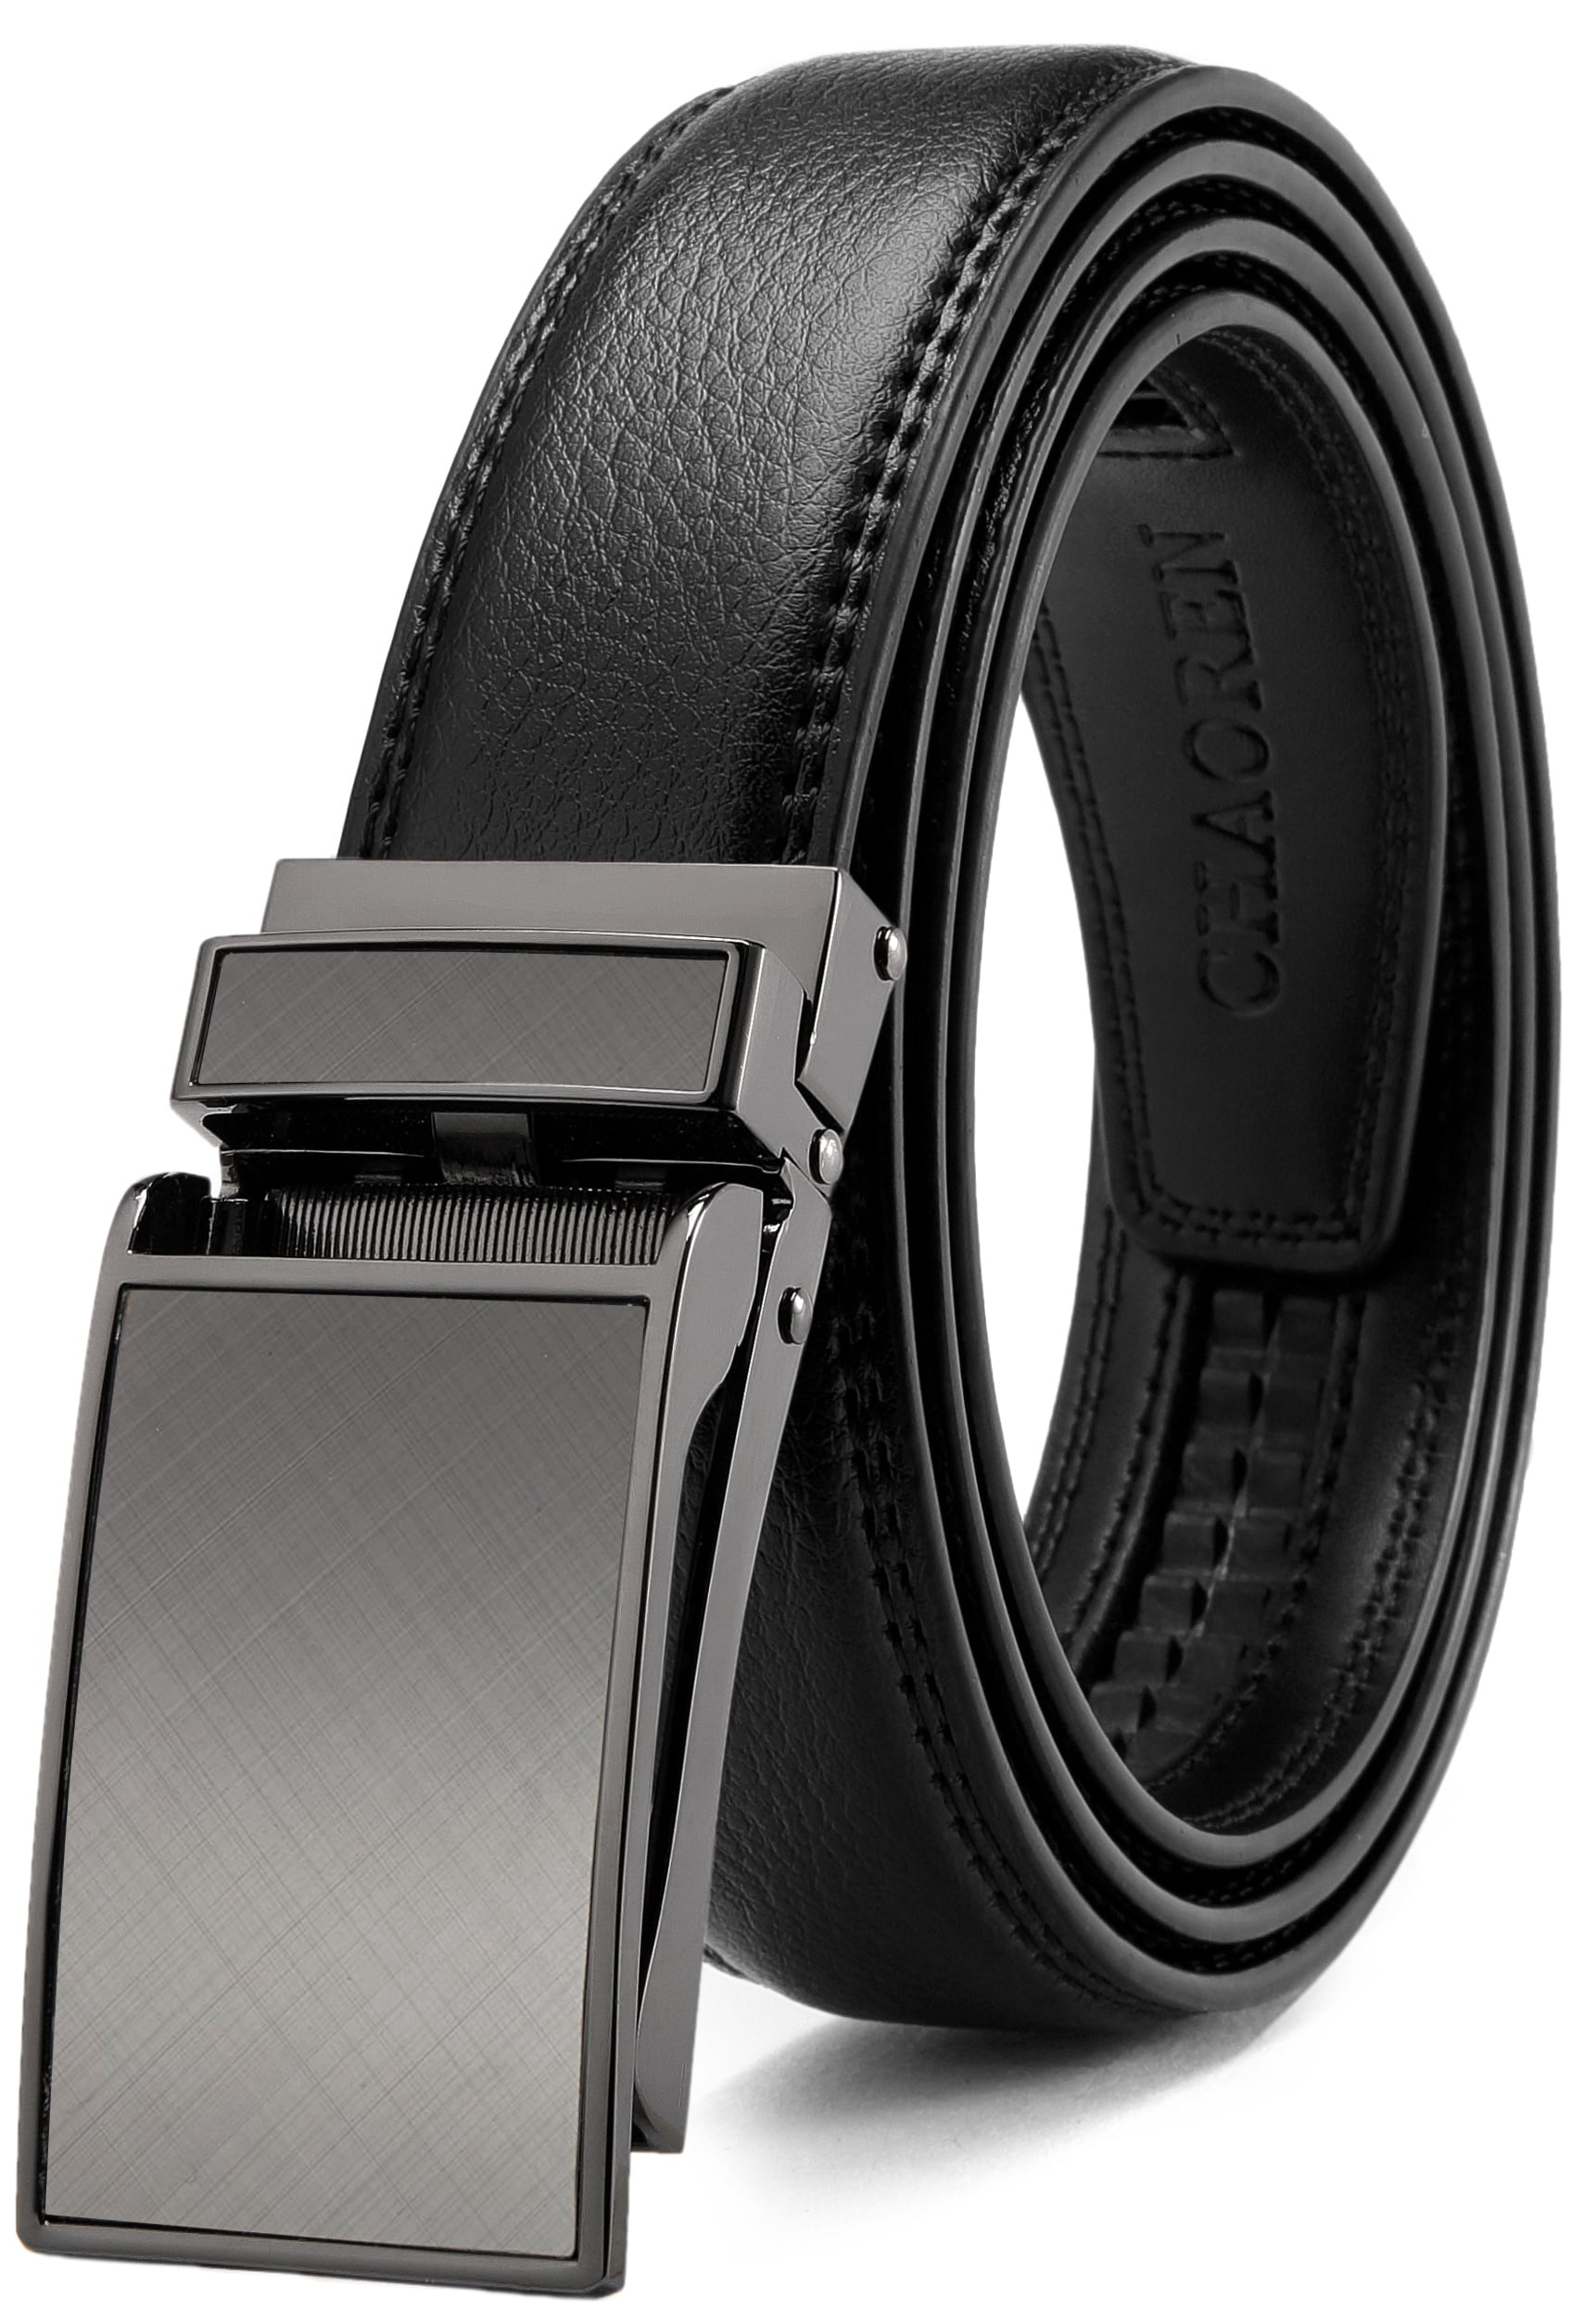 Men's Solid Automatic Buckle Belt with Ratchet Leather Strap 35mm Wide 1 3/8" 